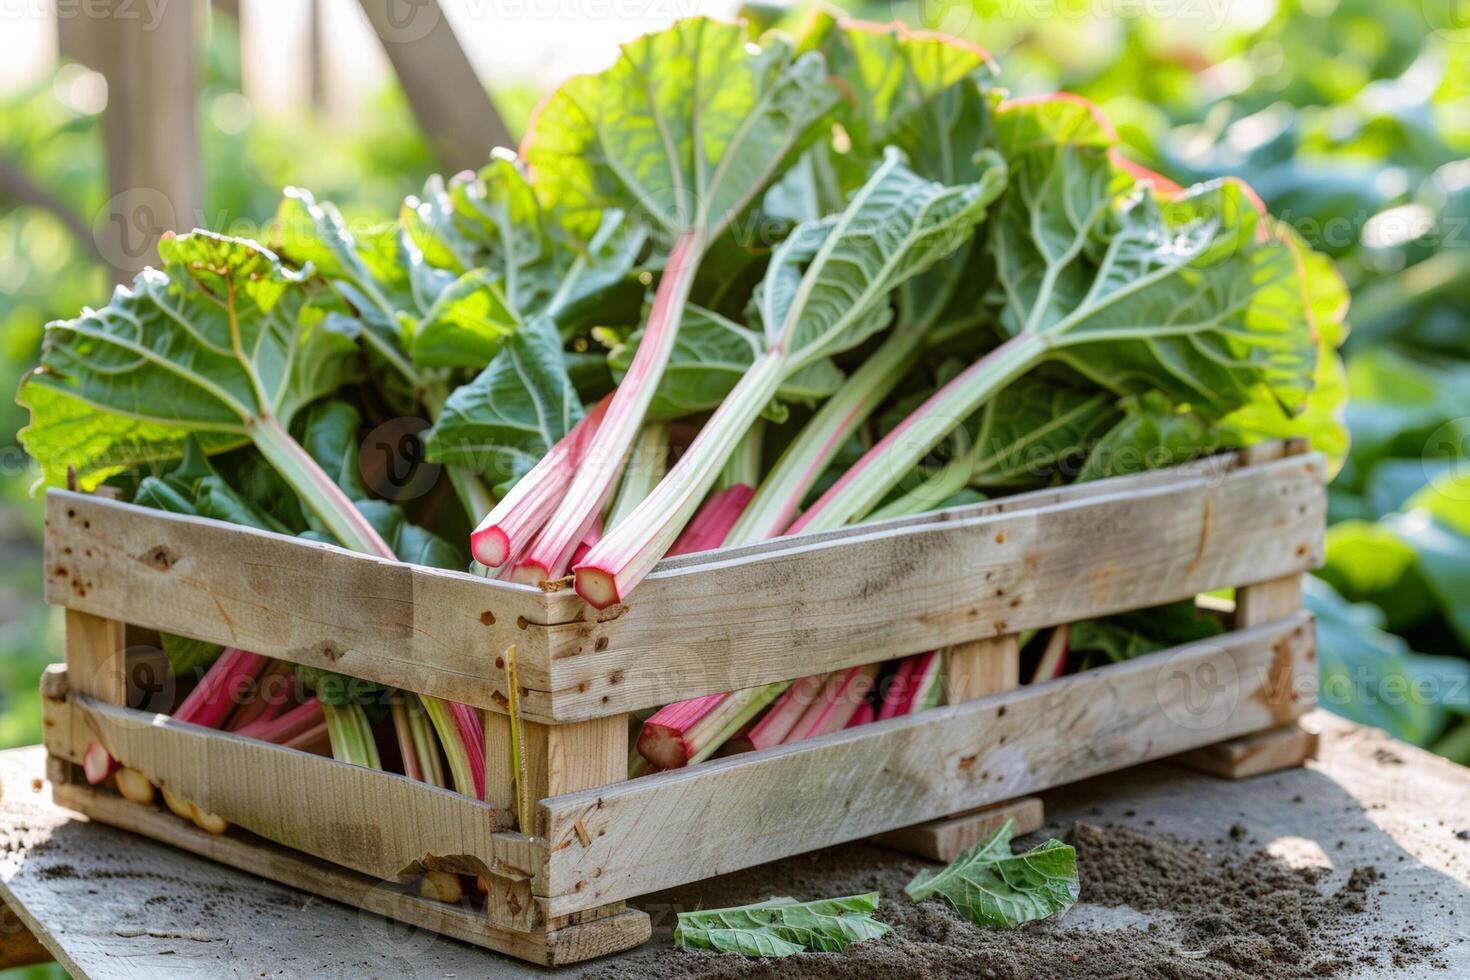 Freshly harvested rhubarb stalks with green leaves in a wooden crate on a garden background, symbolizing organic farming and spring harvest season photo